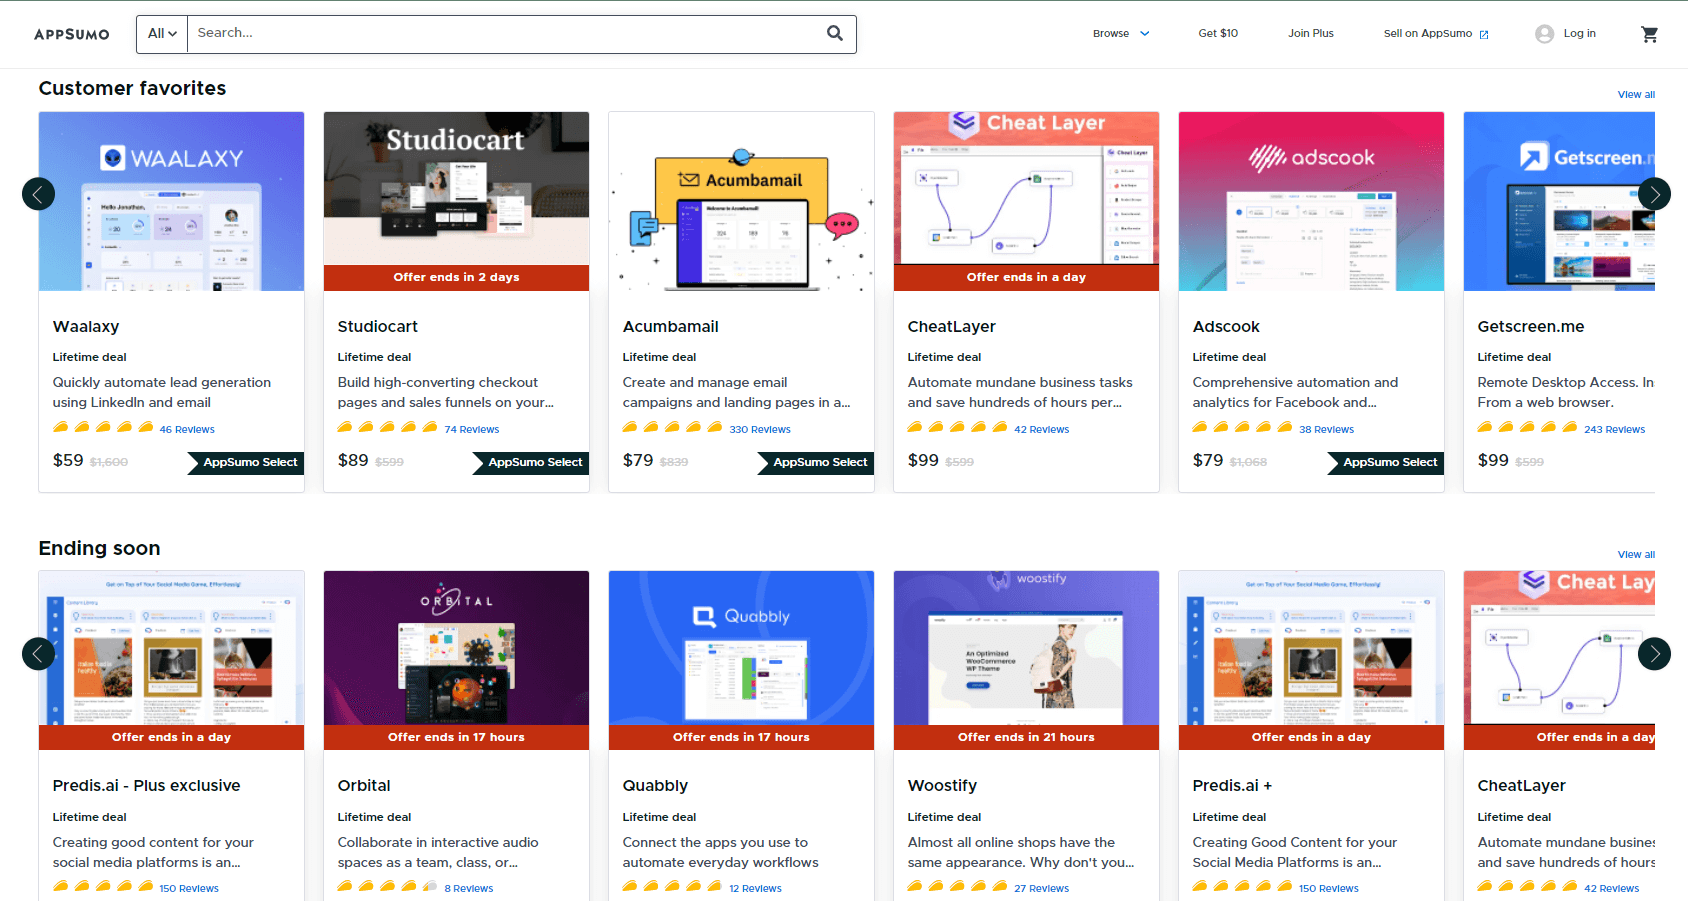 Carousel on the Appsumo main page  